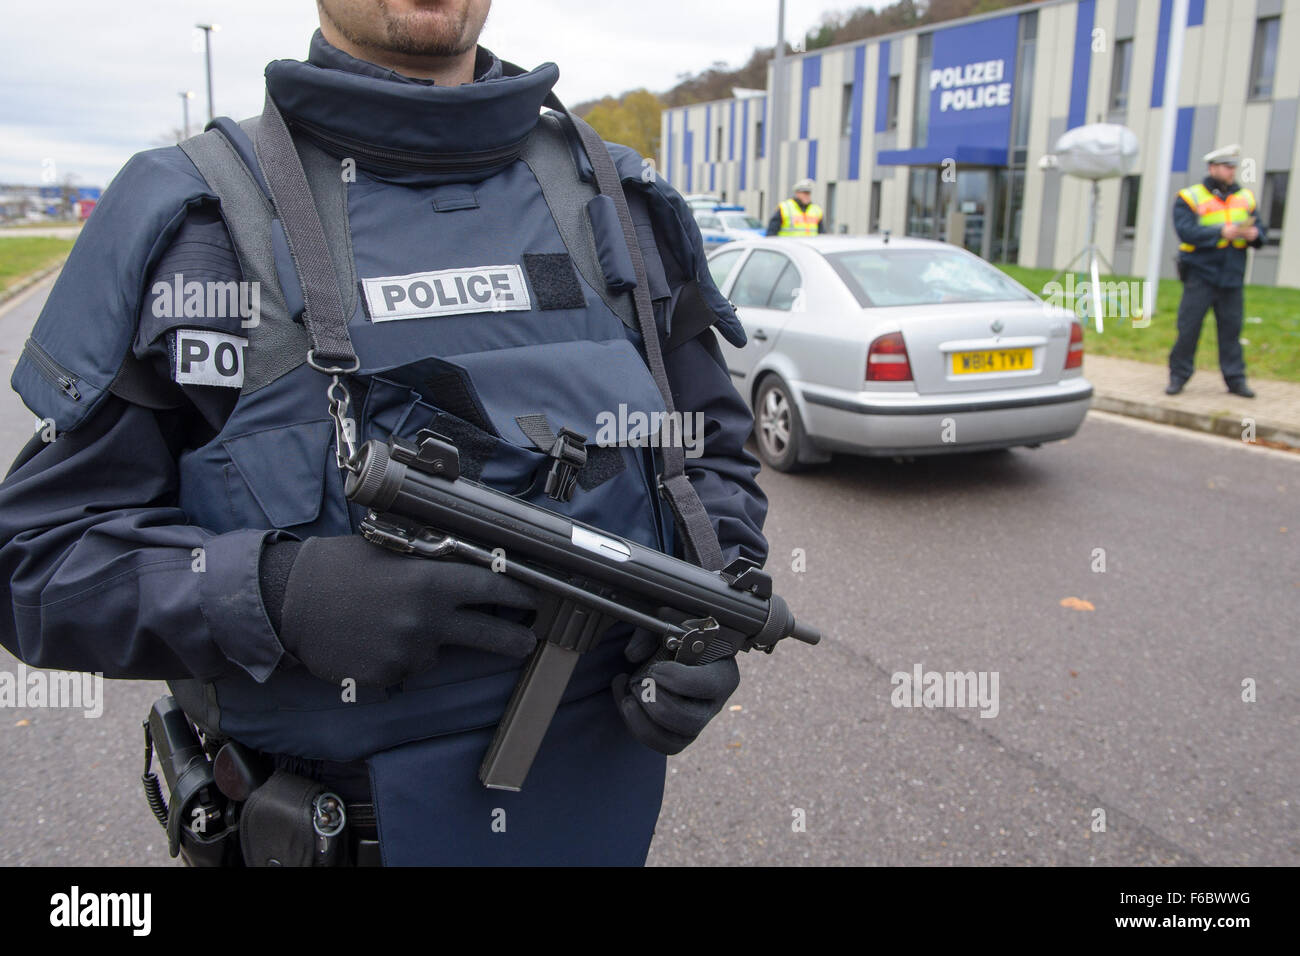 Saarbruecken, Germany. 15th Nov, 2015. An armed French police officer secures the check-point at the Goldene Bremm border crossing where German and French officers are inspecting cars after arriving from France in Saarbruecken, Germany, 15 November 2015. At least 129 were killed in a series of terror attacks in Paris. Photo: OLIVER DIETZE/dpa/Alamy Live News Stock Photo